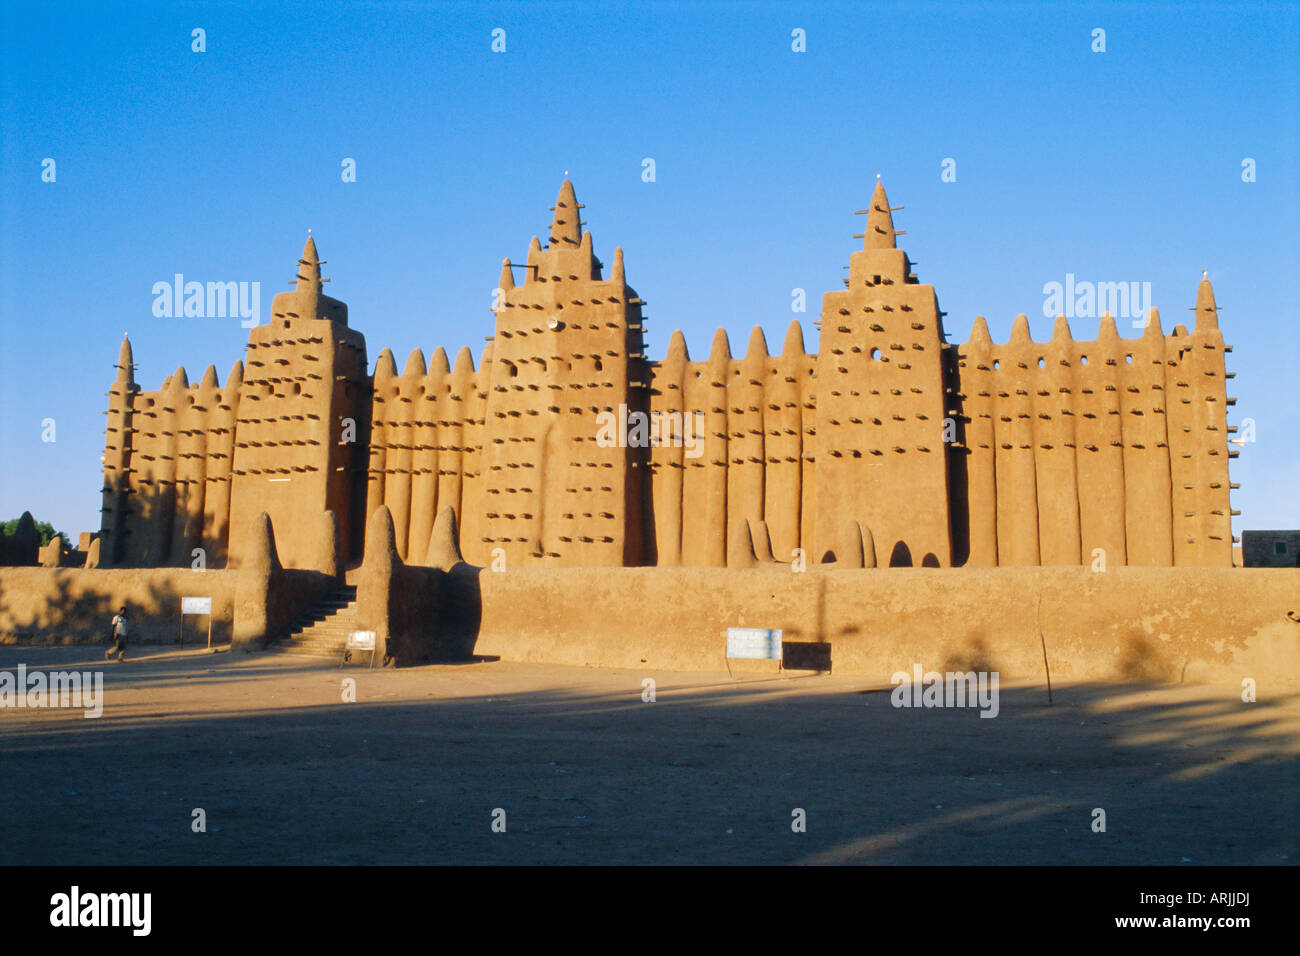 The Great Mosque, Djenne, Mali, Africa Stock Photo